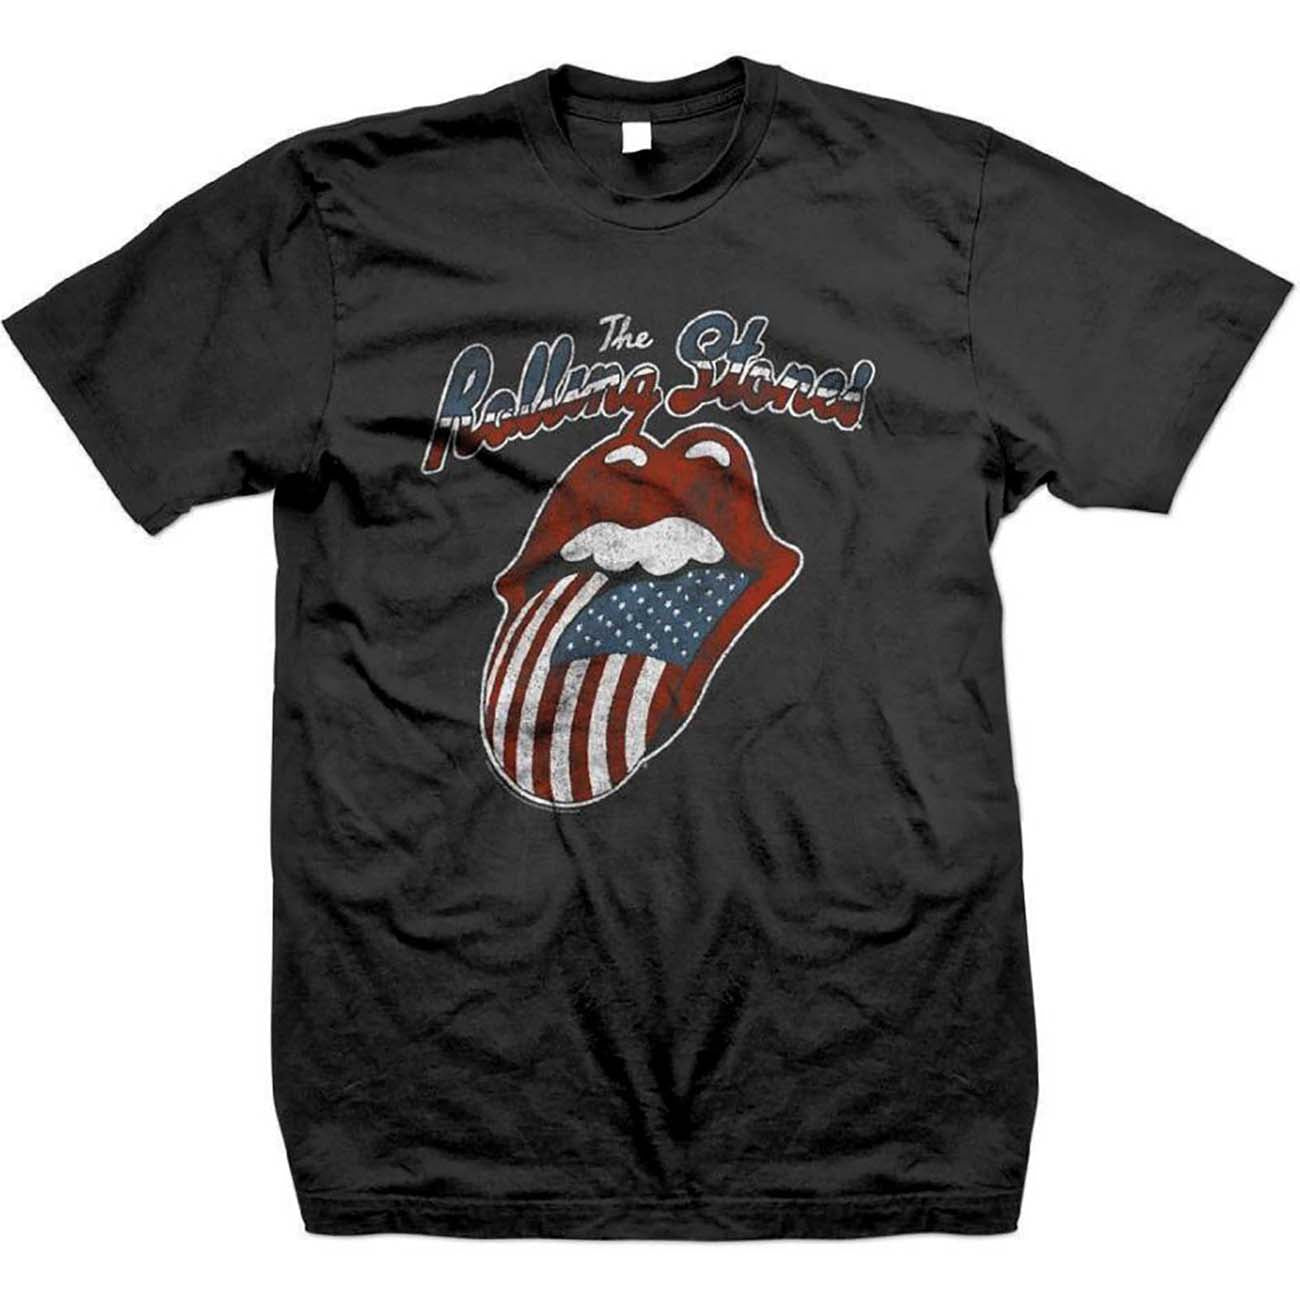 The Rolling Stones T-Shirt: Tour of America '78